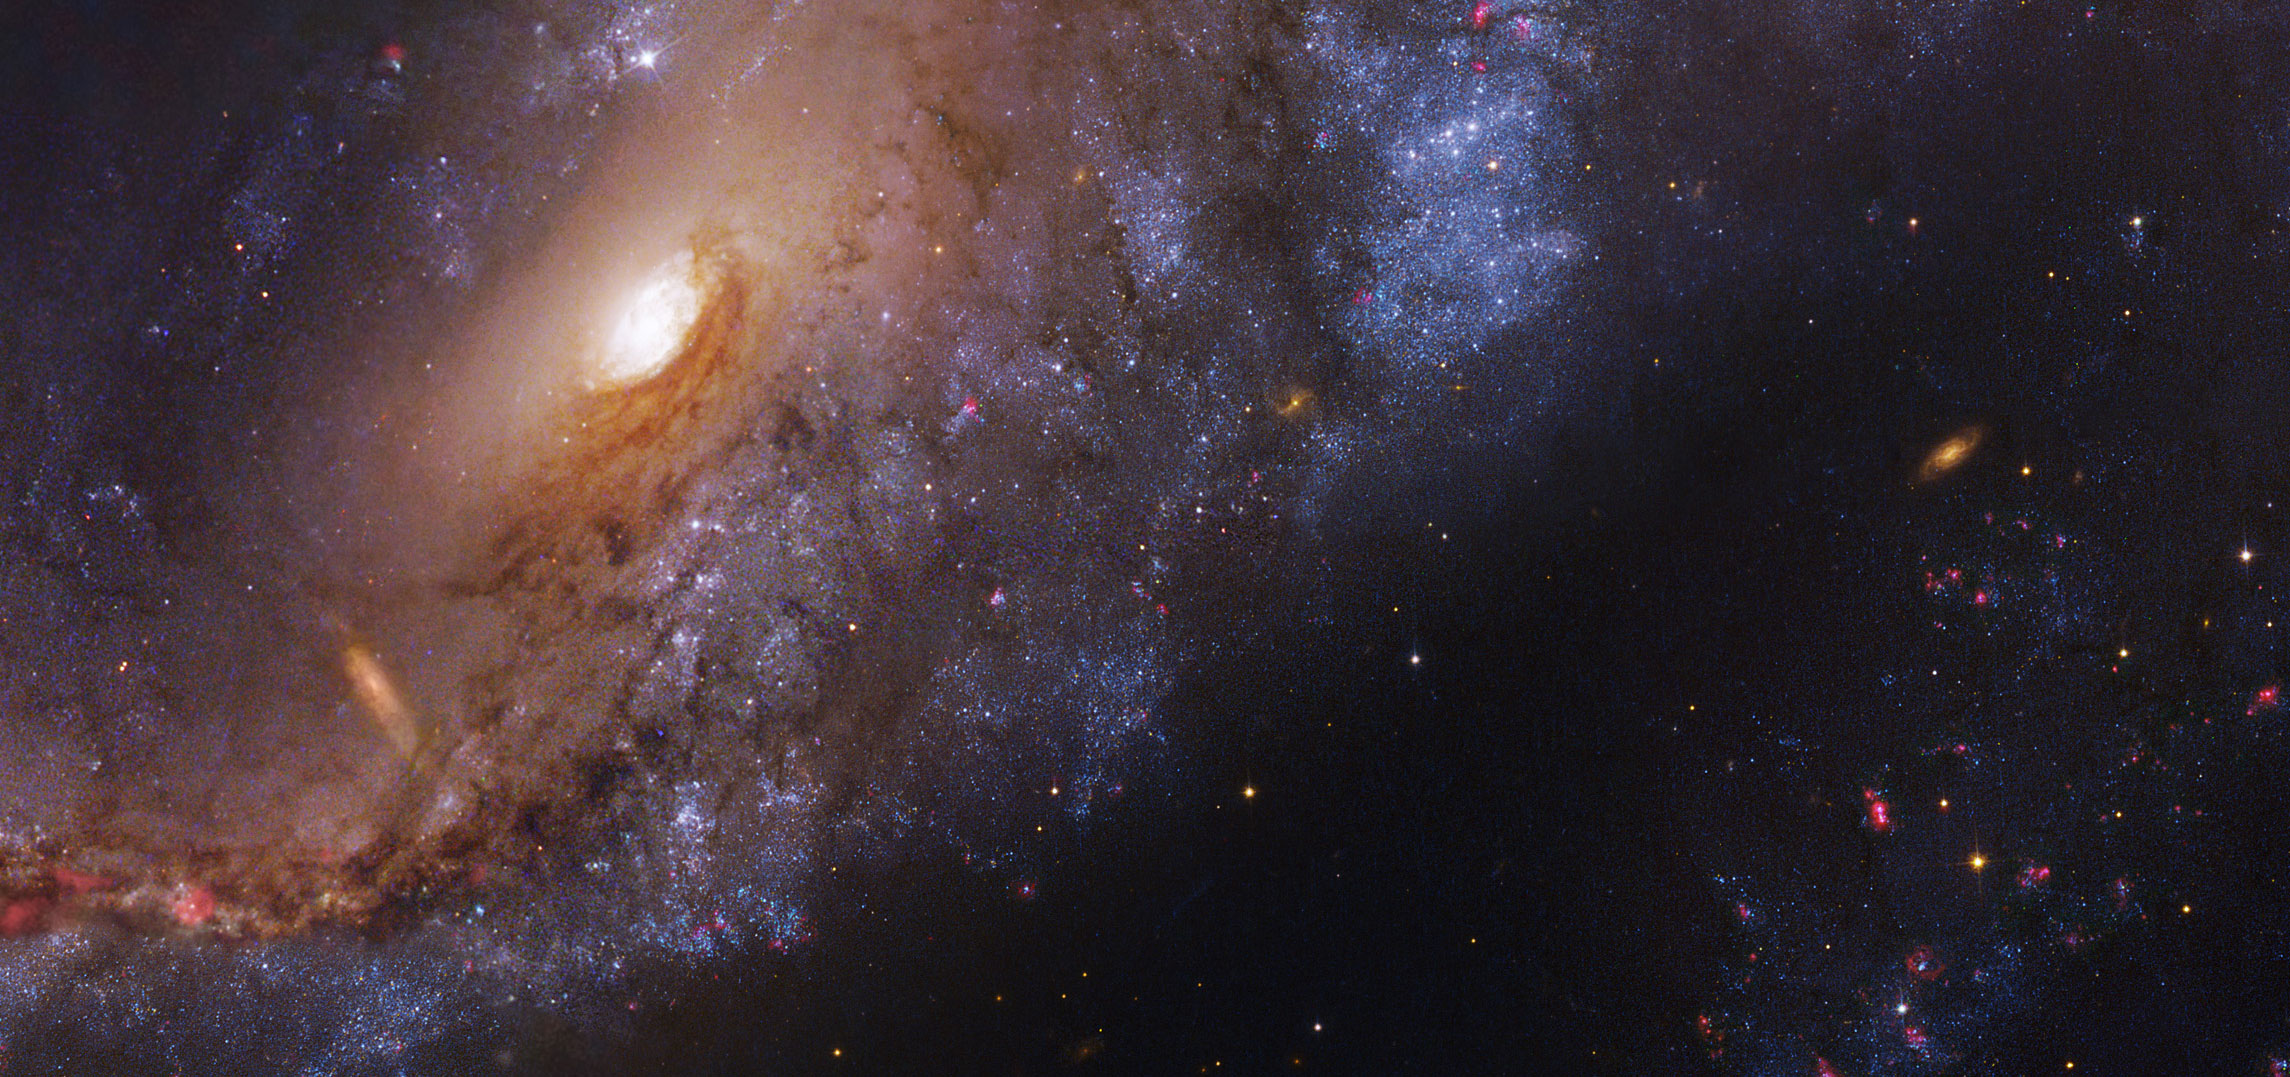 The inner regions of the Meathook Galaxy, NGC 2442, using observations from Hubble and a 2.2 meter telescope in Chile. 